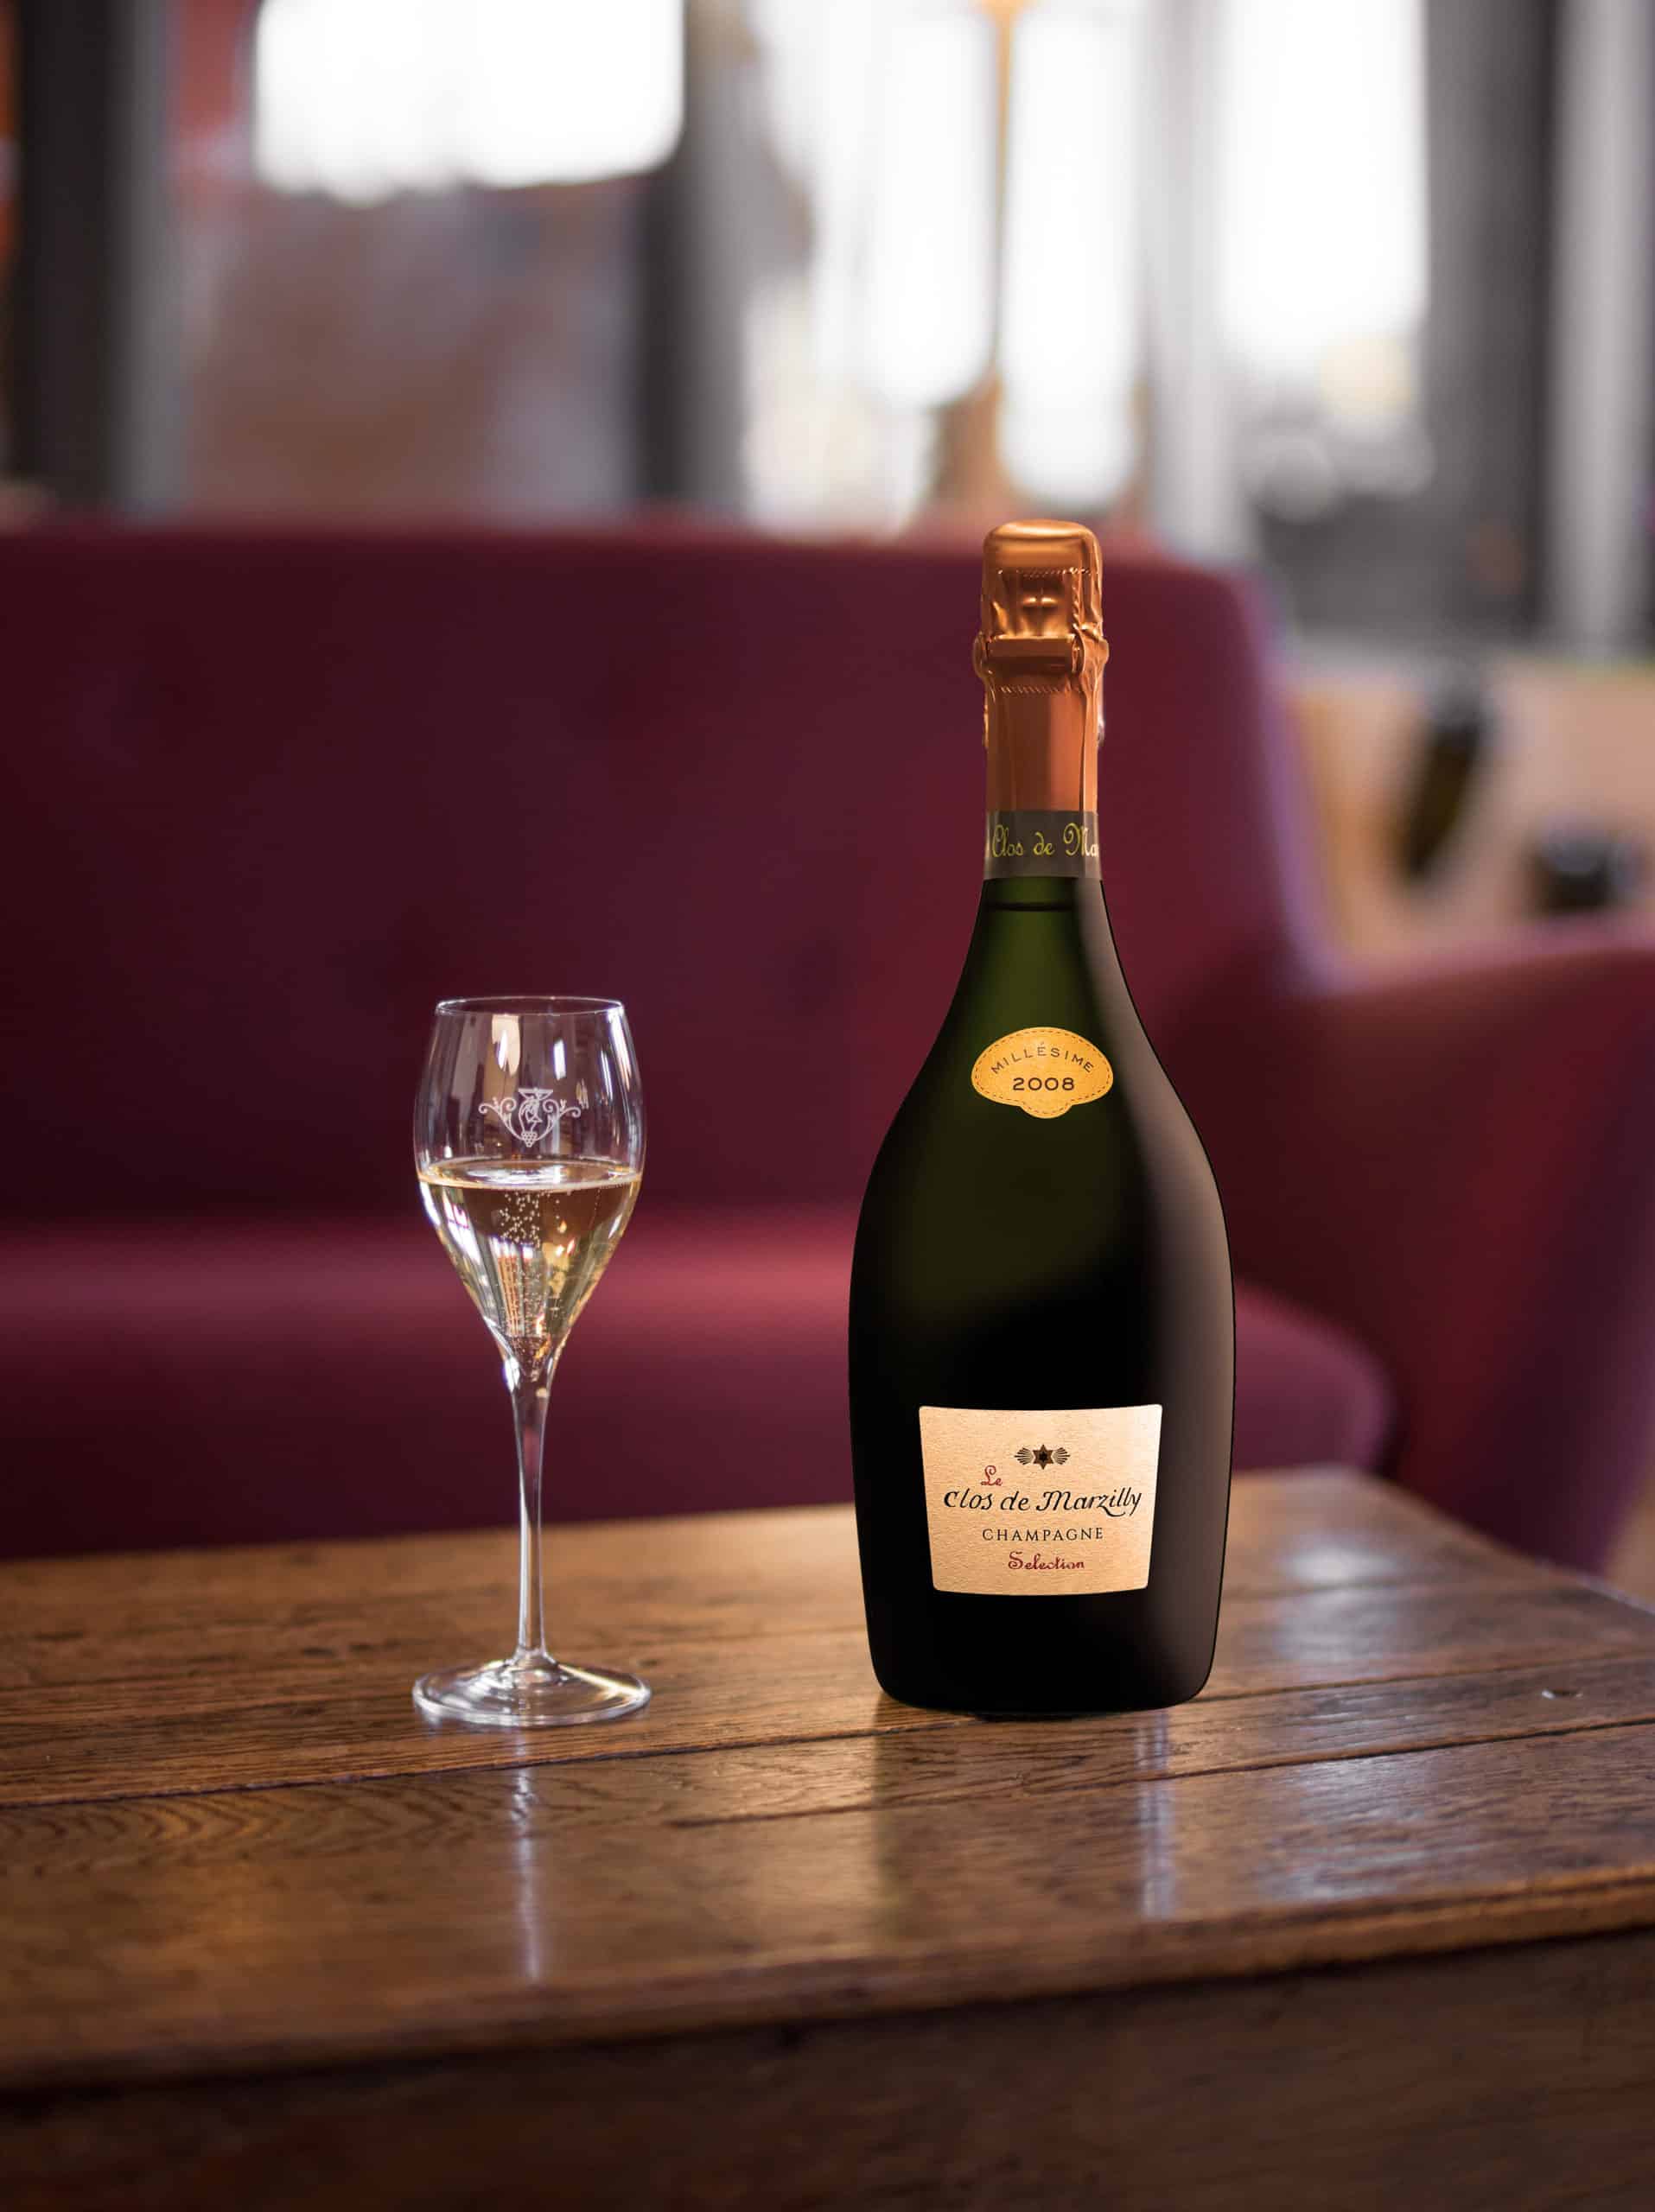 The Vintage of The Champagne House Michel fagot